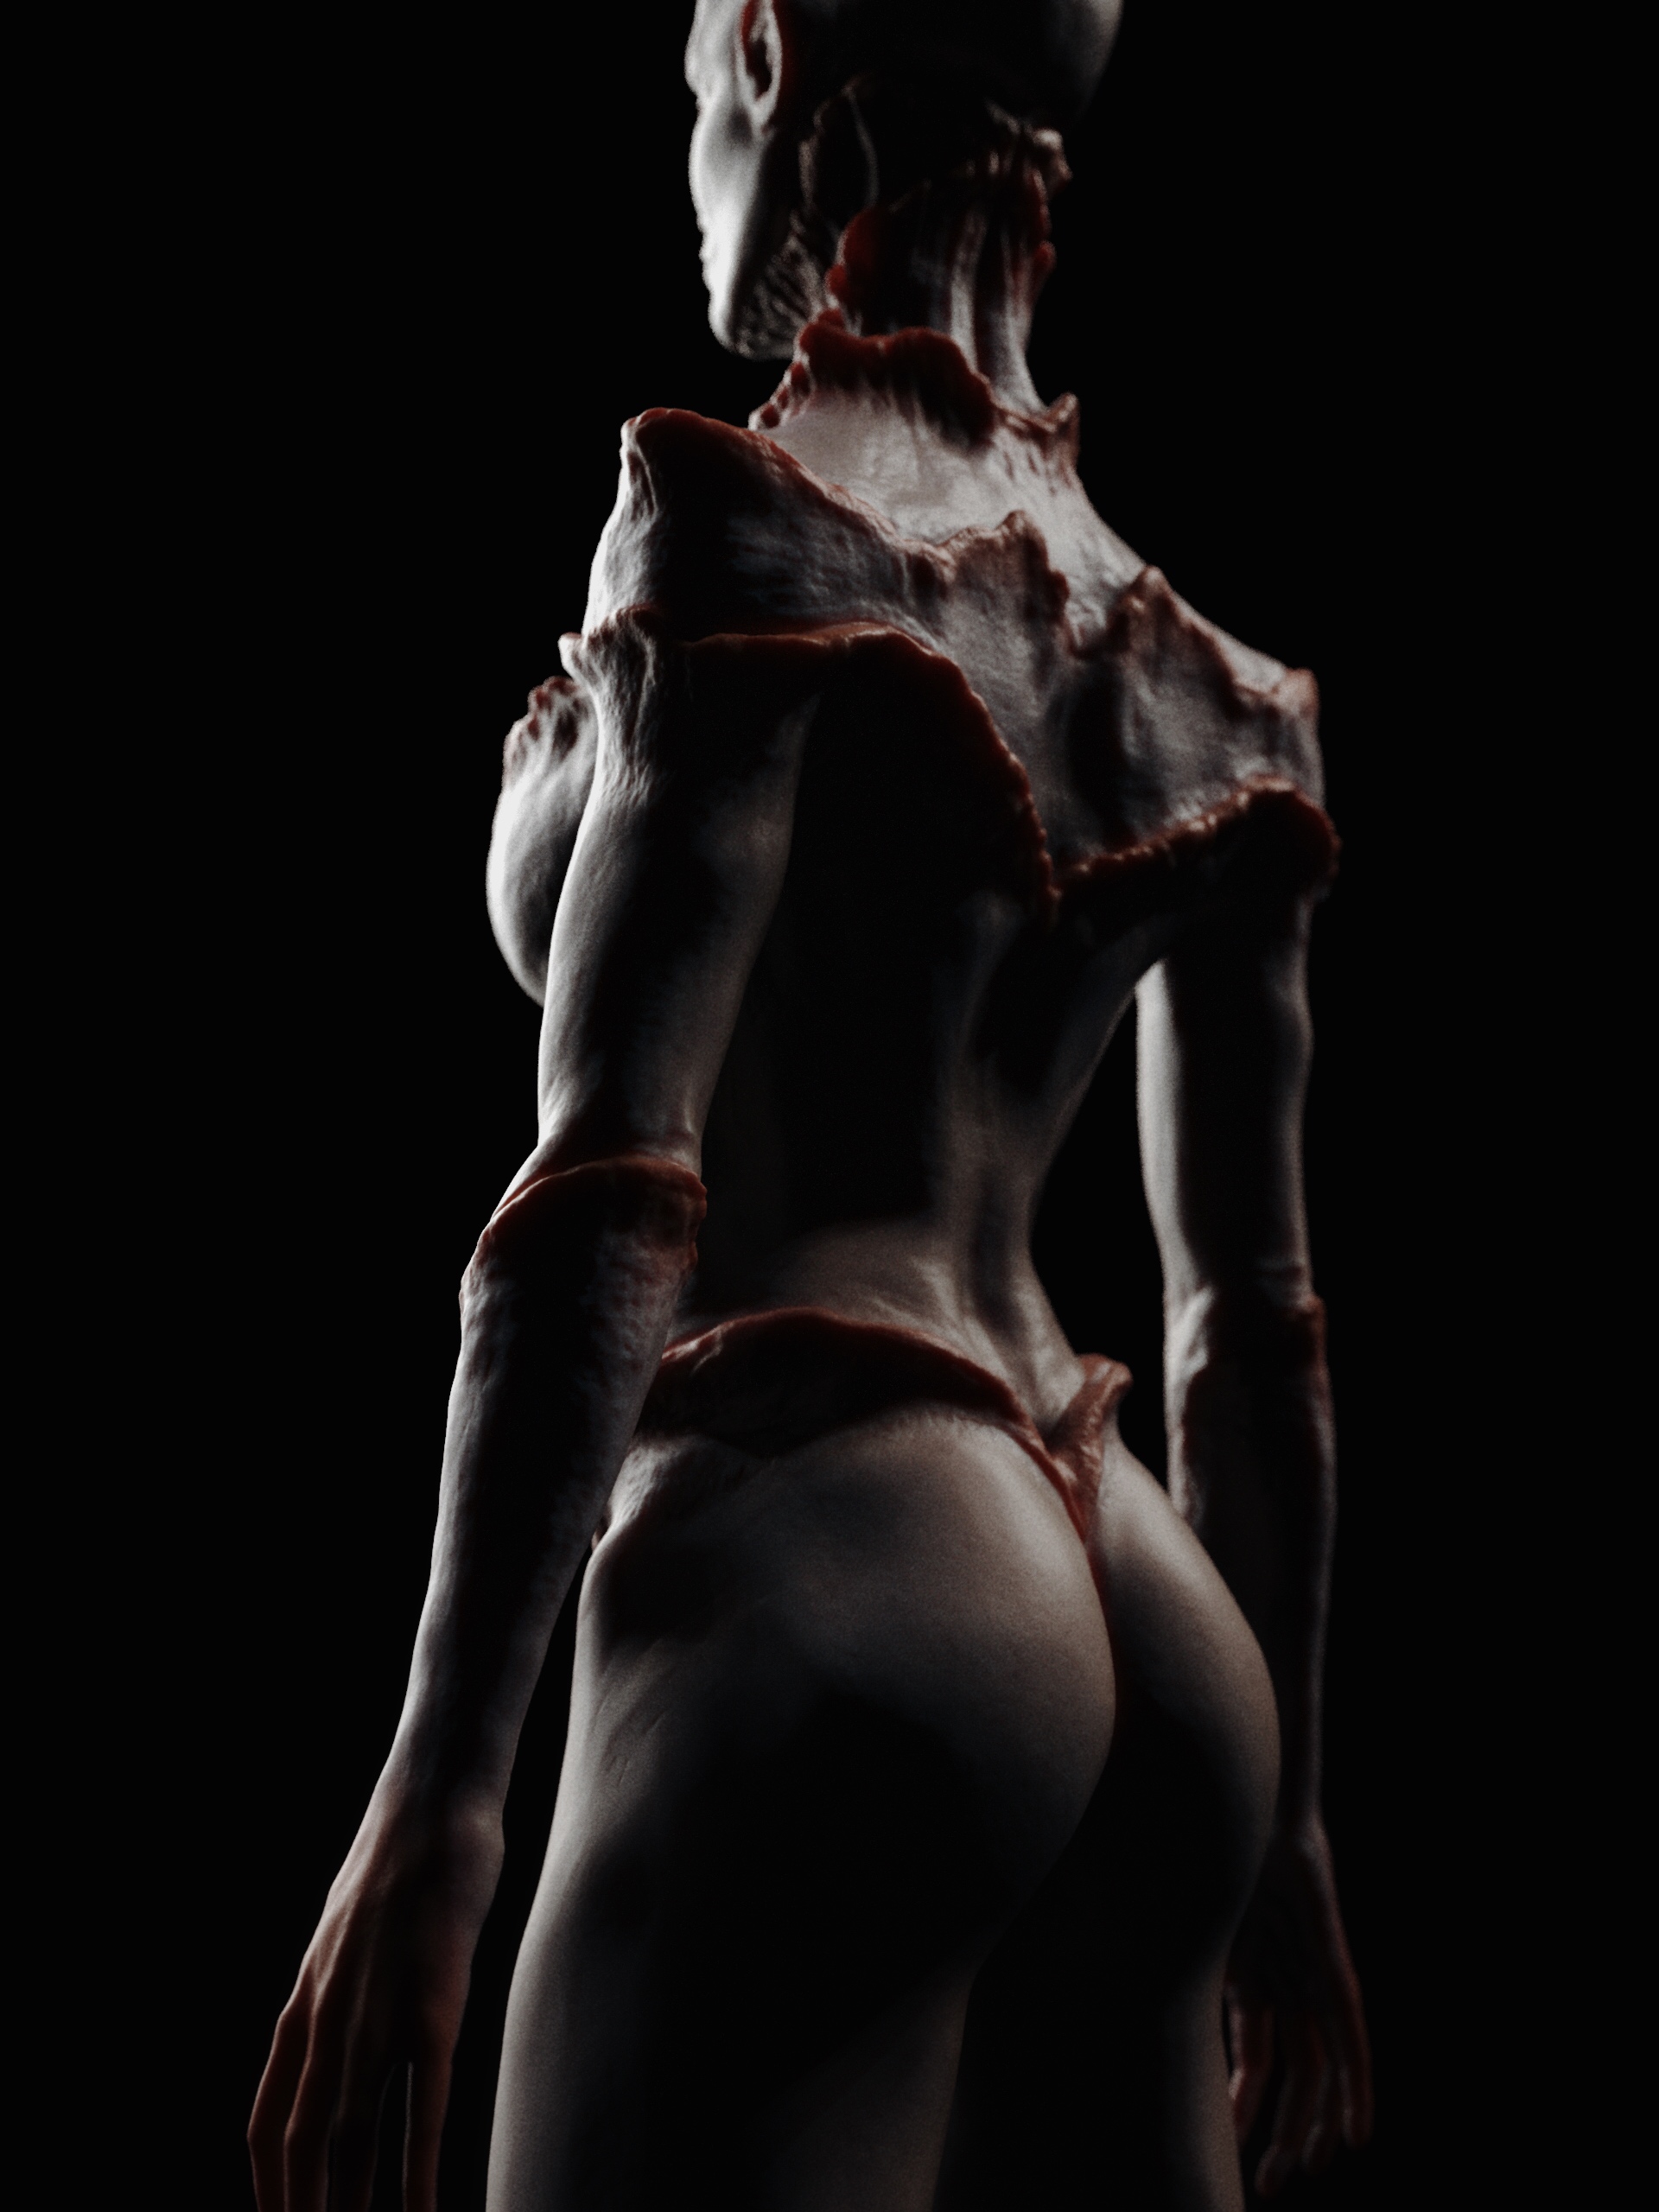 Concept design of humanoid creature, female anatomy exercise and skin texturing.